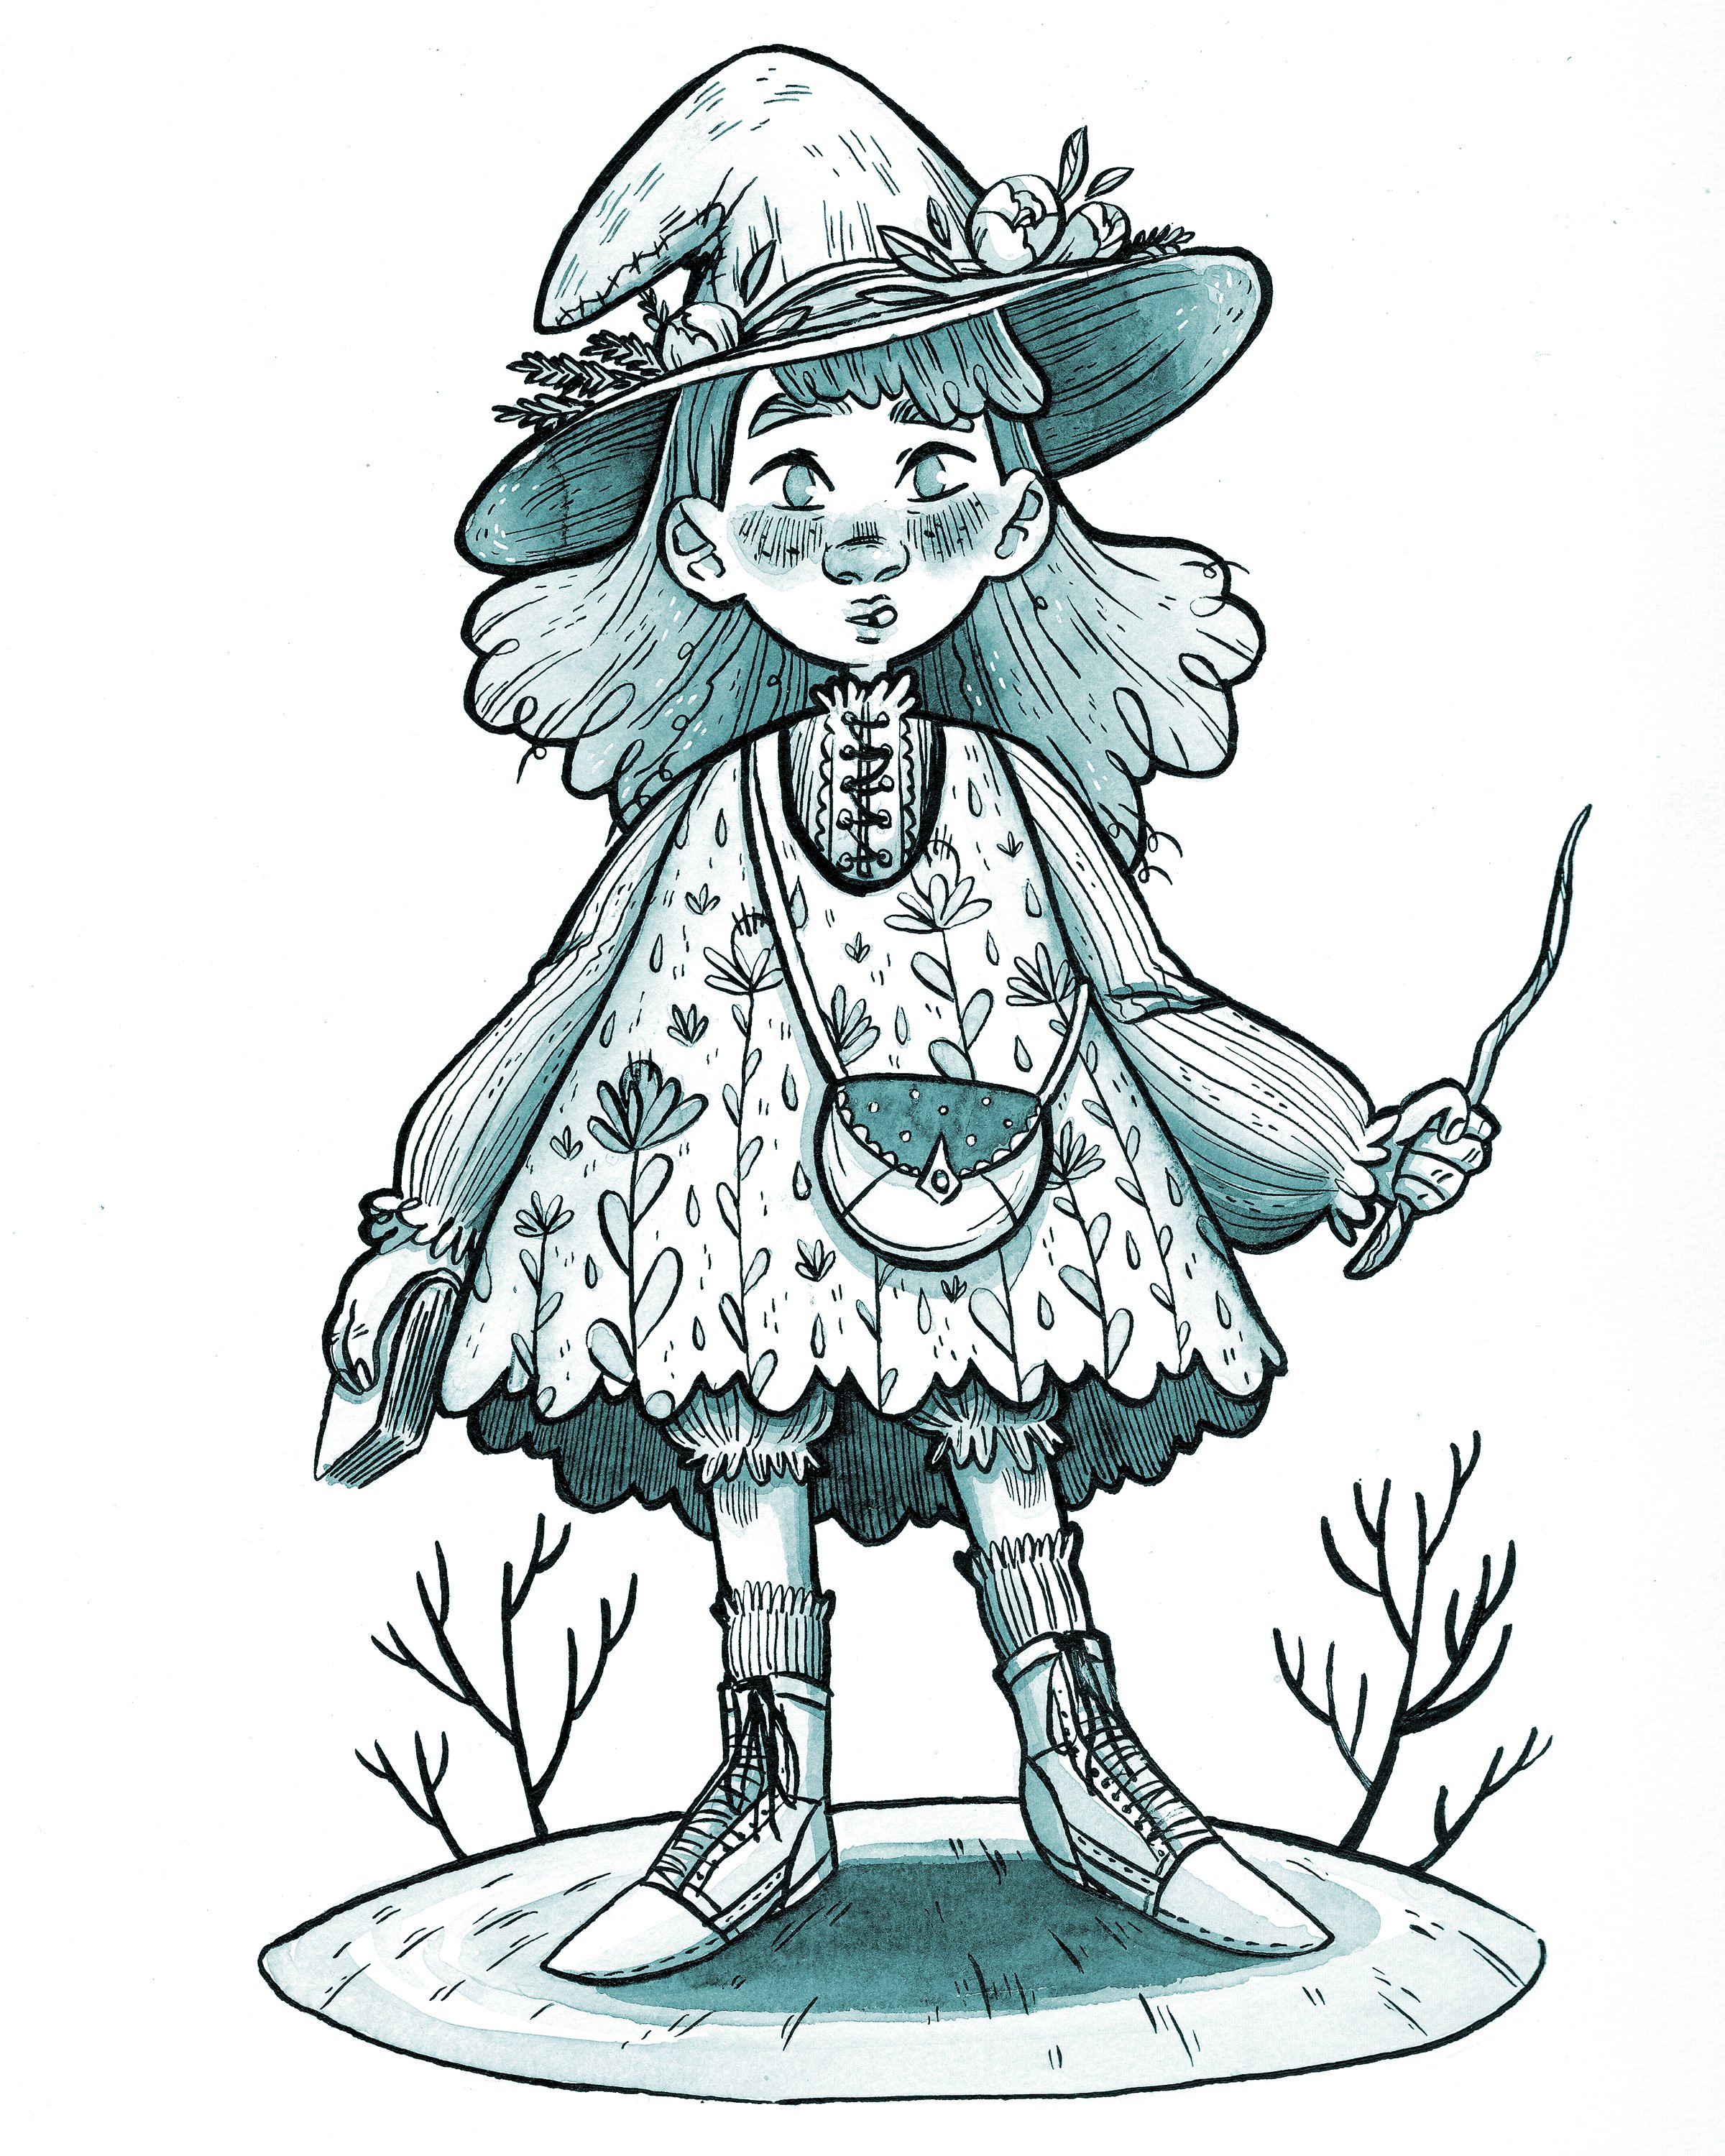 witchling_8x10.jpg